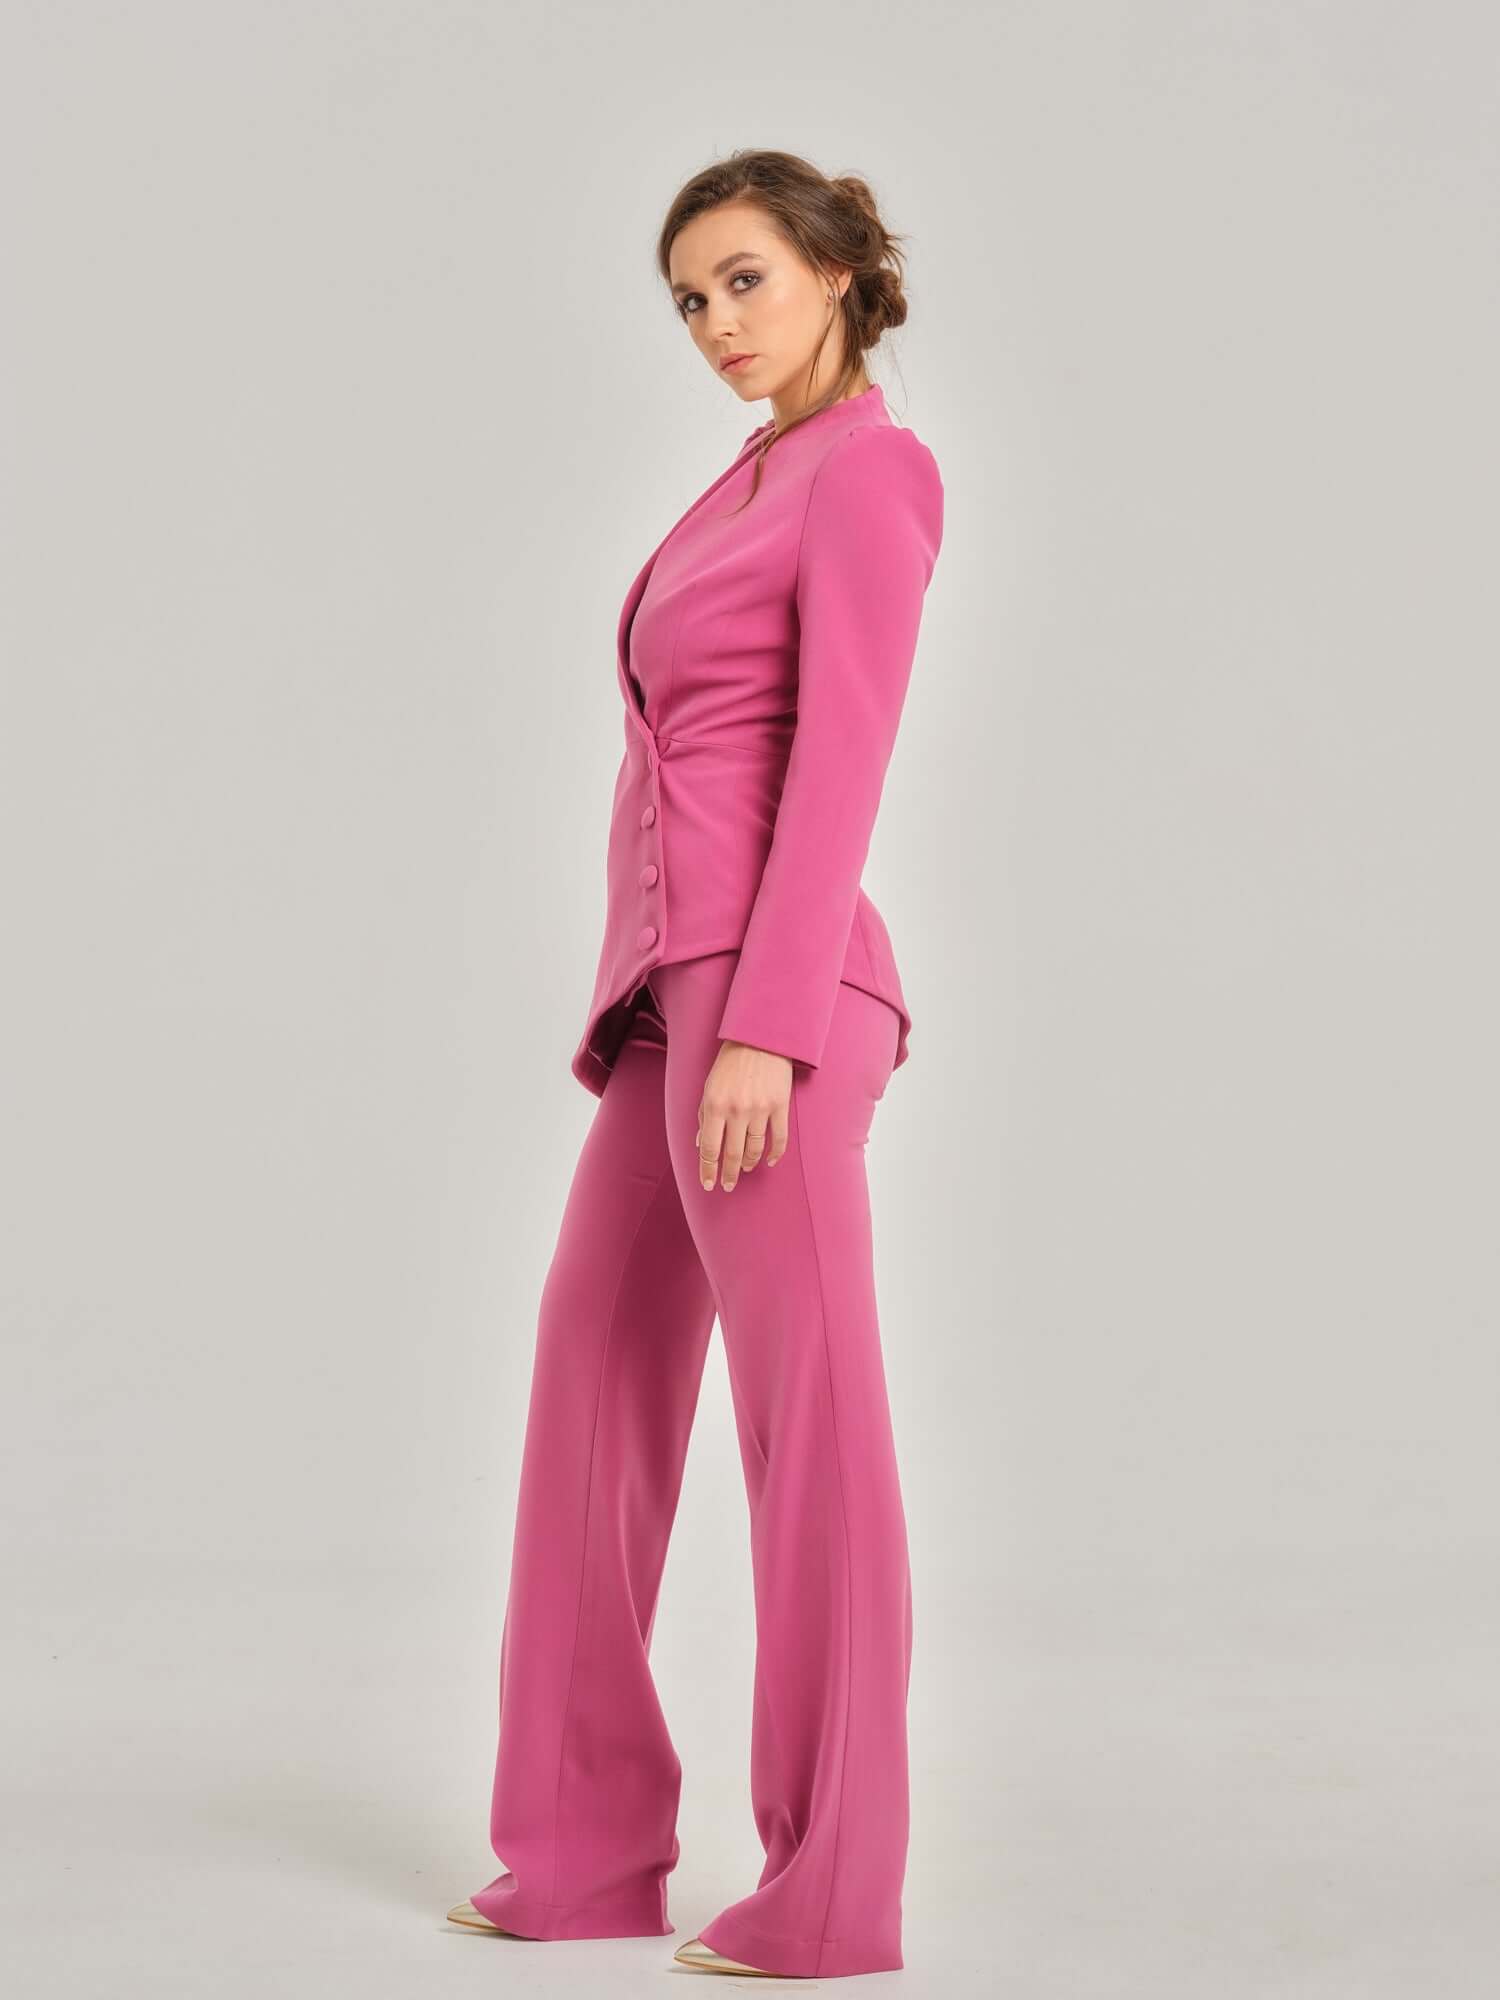 Tia Dorraine Sweet Desire High-Waist Straight-Leg Trousers These must-have classic trousers are a true investment piece as they will transition effortlessly between seasons. Crafted from stretch crepe for everyday comfort, this versatile piece is tailored